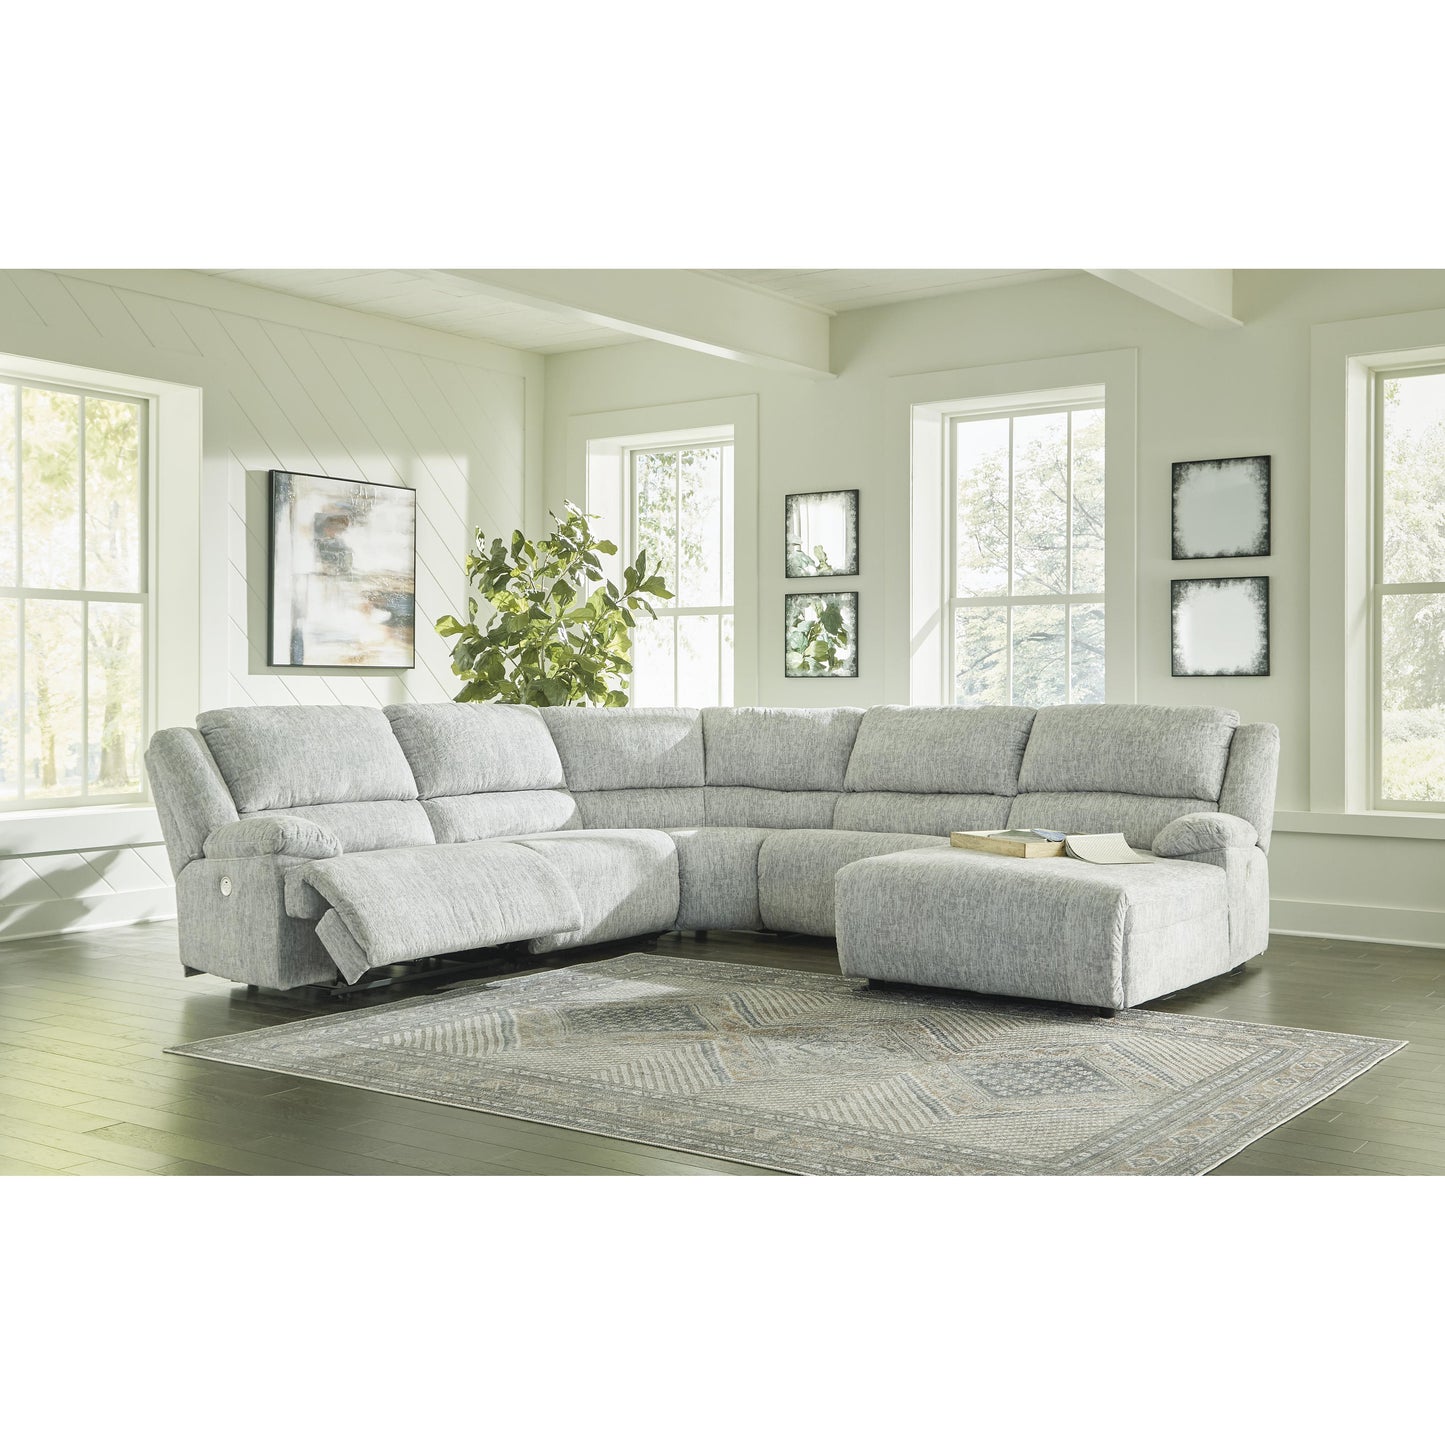 Signature Design by Ashley McClelland Power Reclining Fabric 5 pc Sectional 2930258/2930219/2930277/2930246/2930297 IMAGE 4